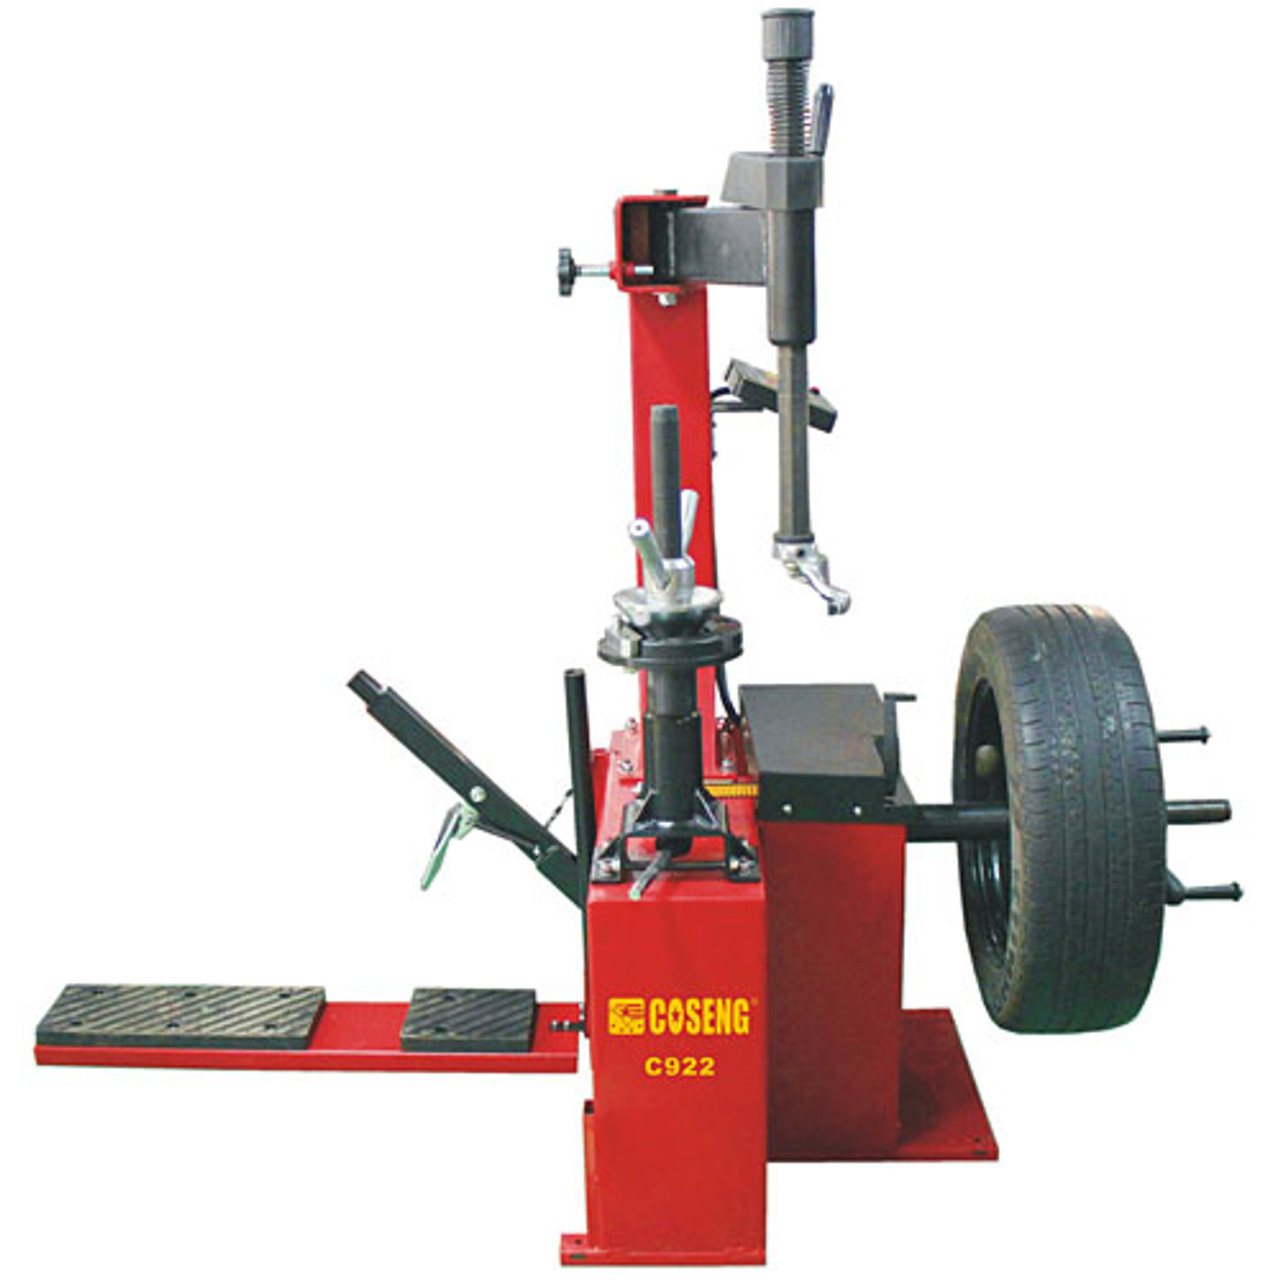 Manual tire changer for sale